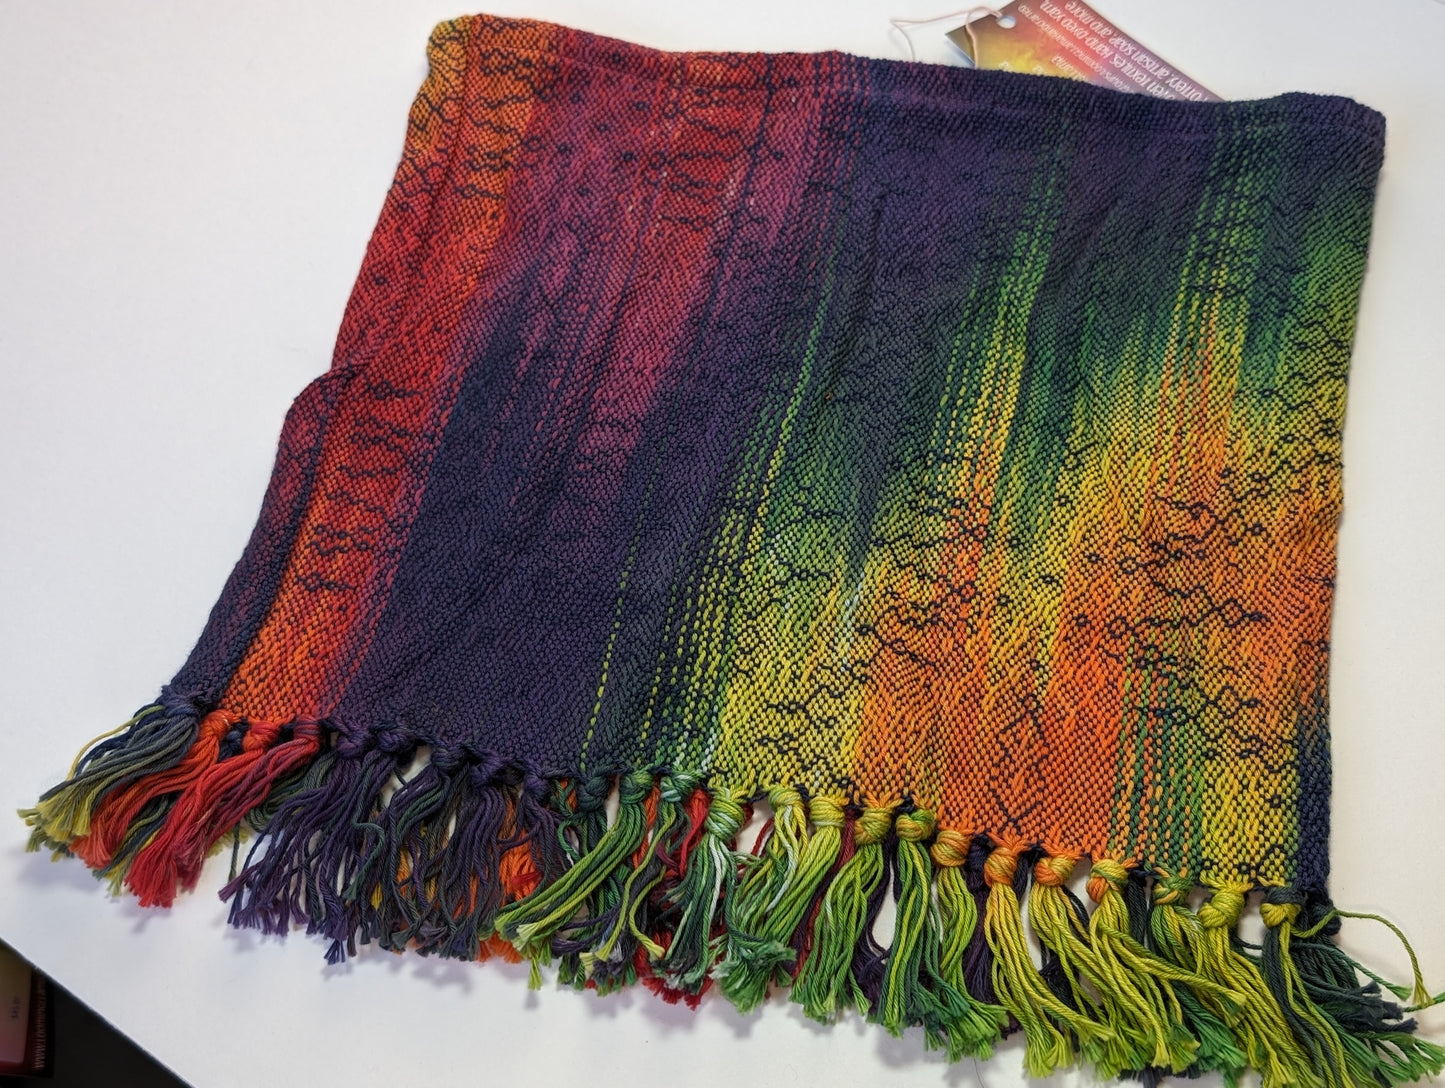 Handwoven Mini Cowl with knotted fringe - Intense Agate - Ready to ship!